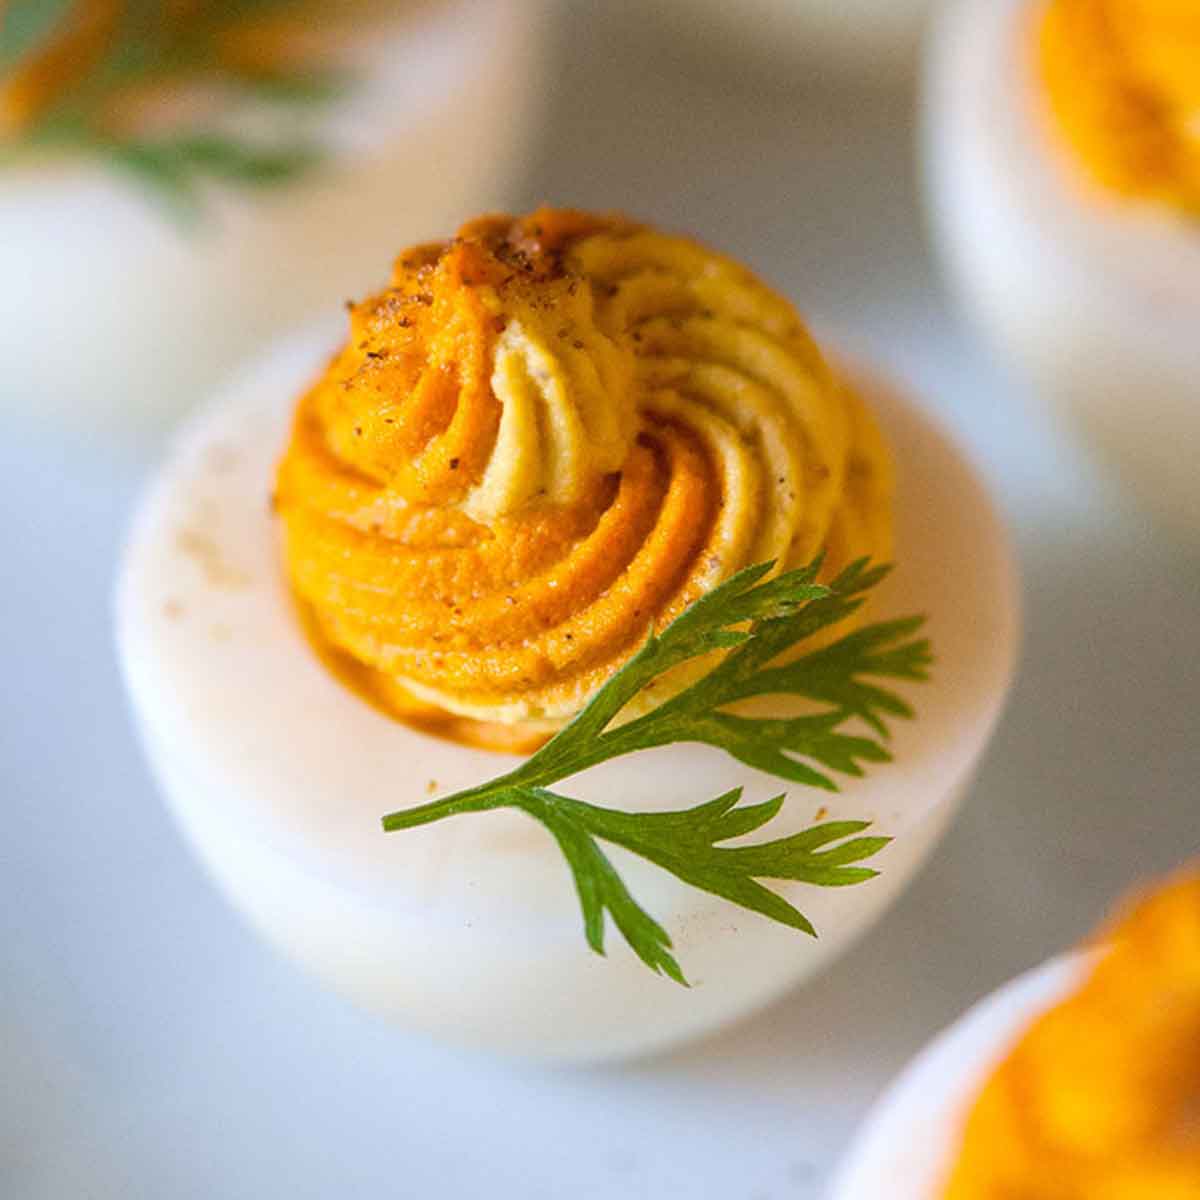 A closeup of a multi-colored deviled egg on a plate with a few others, garnished with a carrot frond.